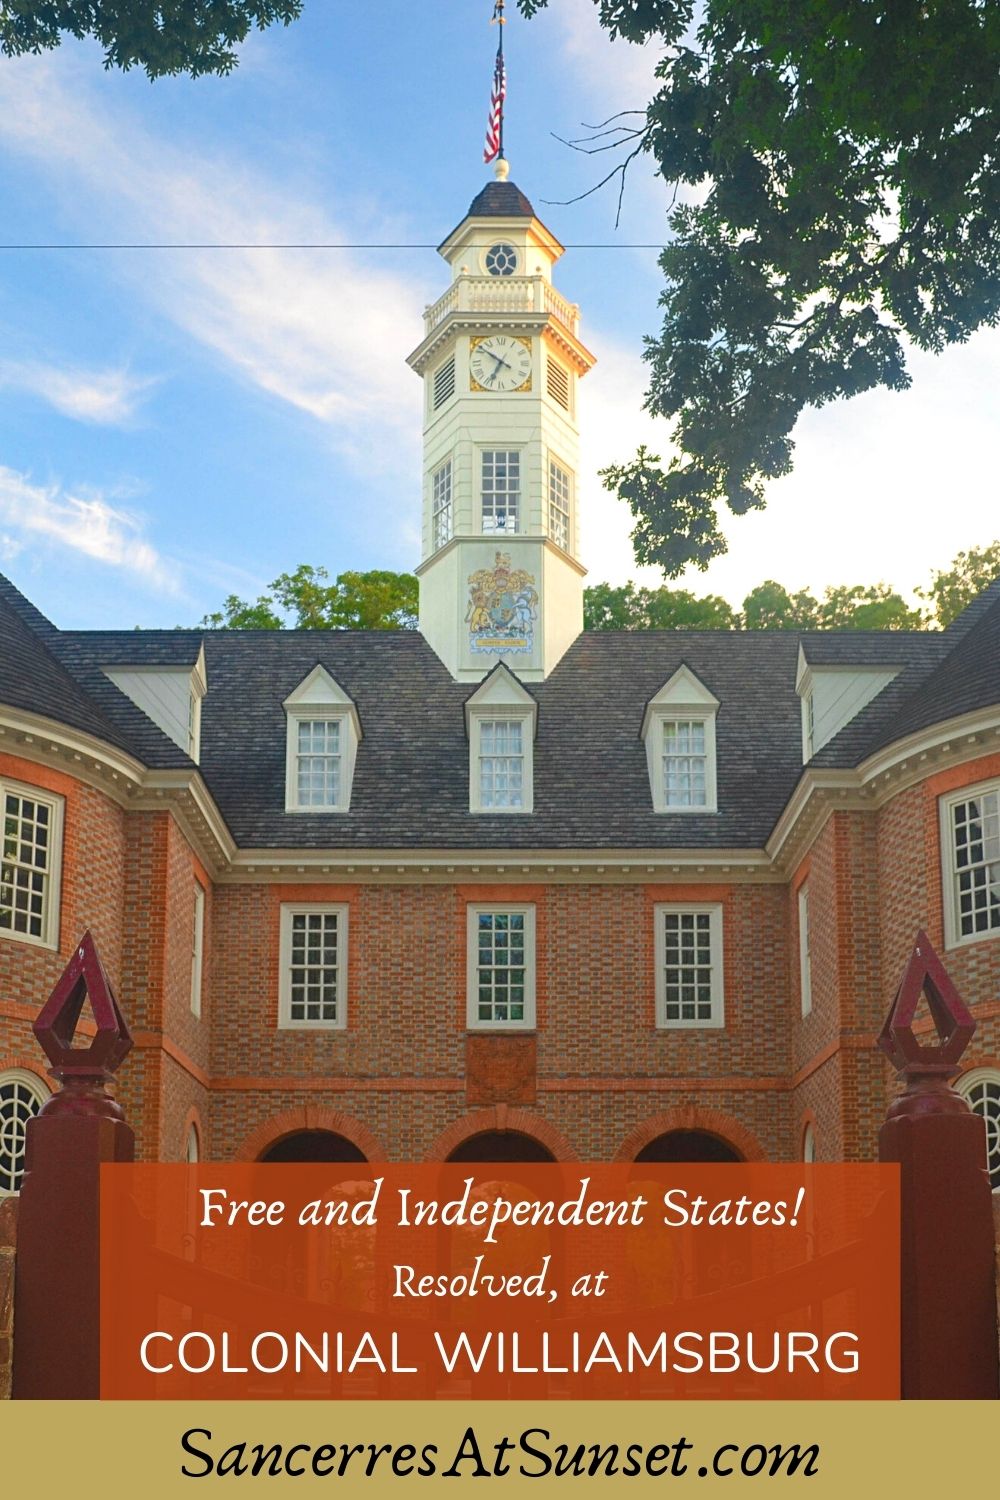 Resolved at Colonial Williamsburg, Free and Independent States!